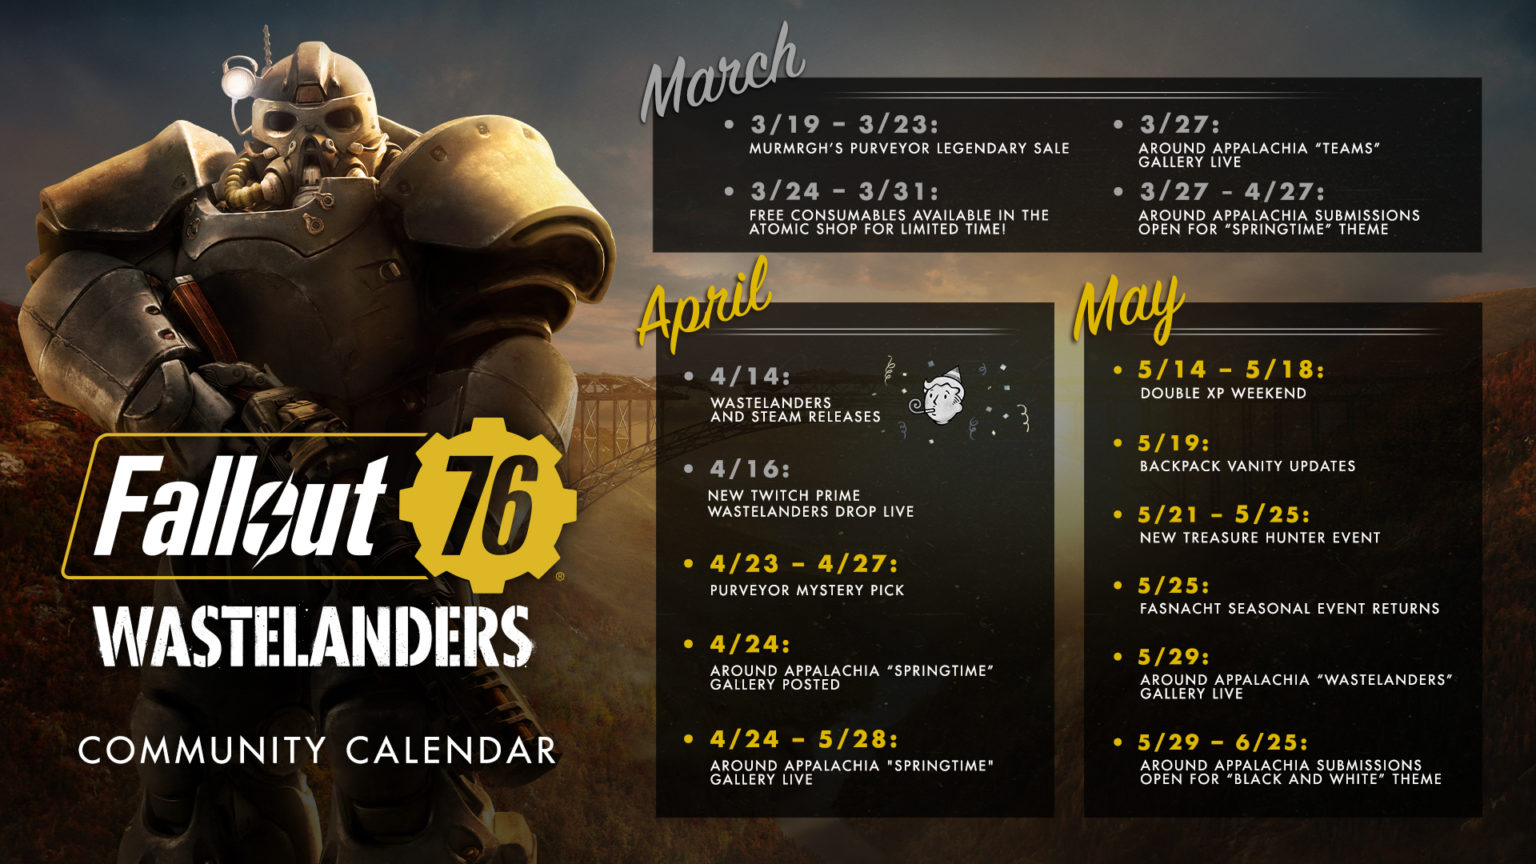 FALLOUT 76 INSIDE THE VAULT COMMUNITY EVENTS AND ACTIVITIES (Re